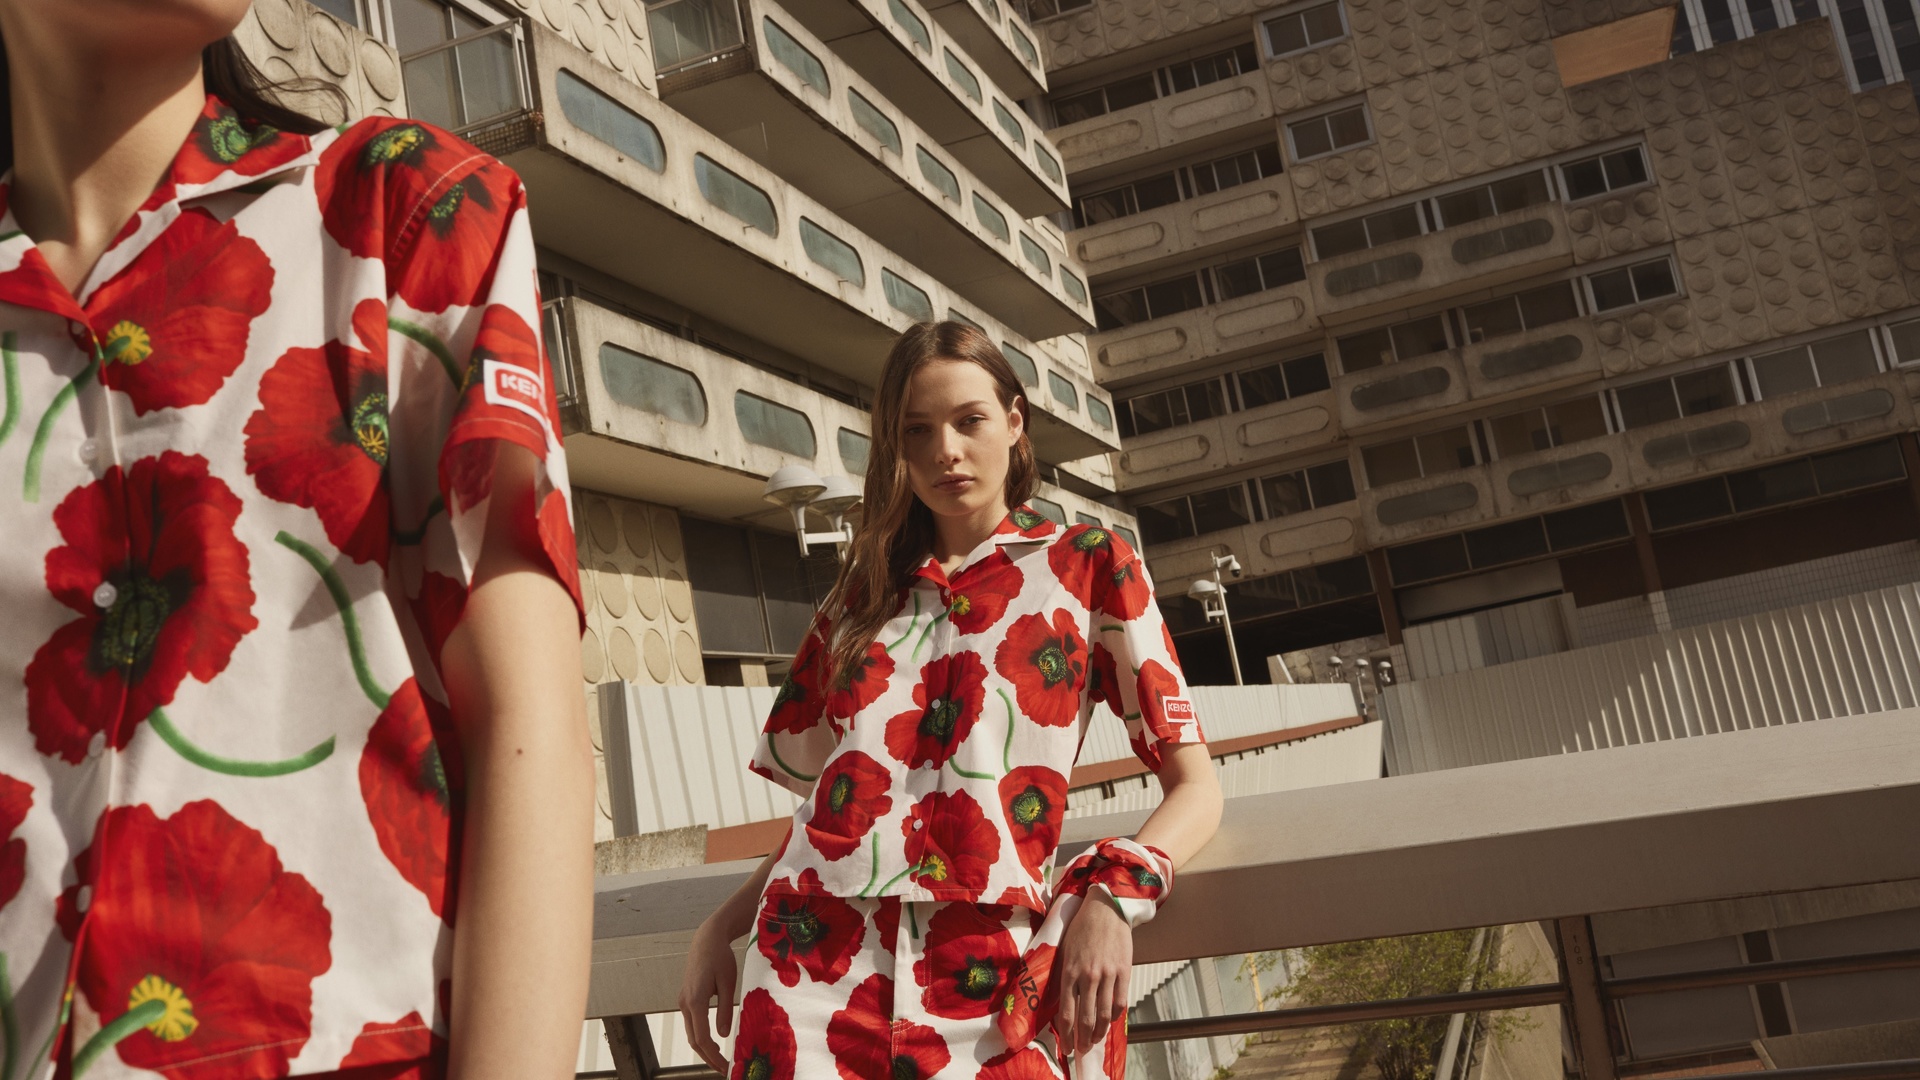 kenzo, spring summer 2022 limited edition capsule collections, fashion, poppy collection